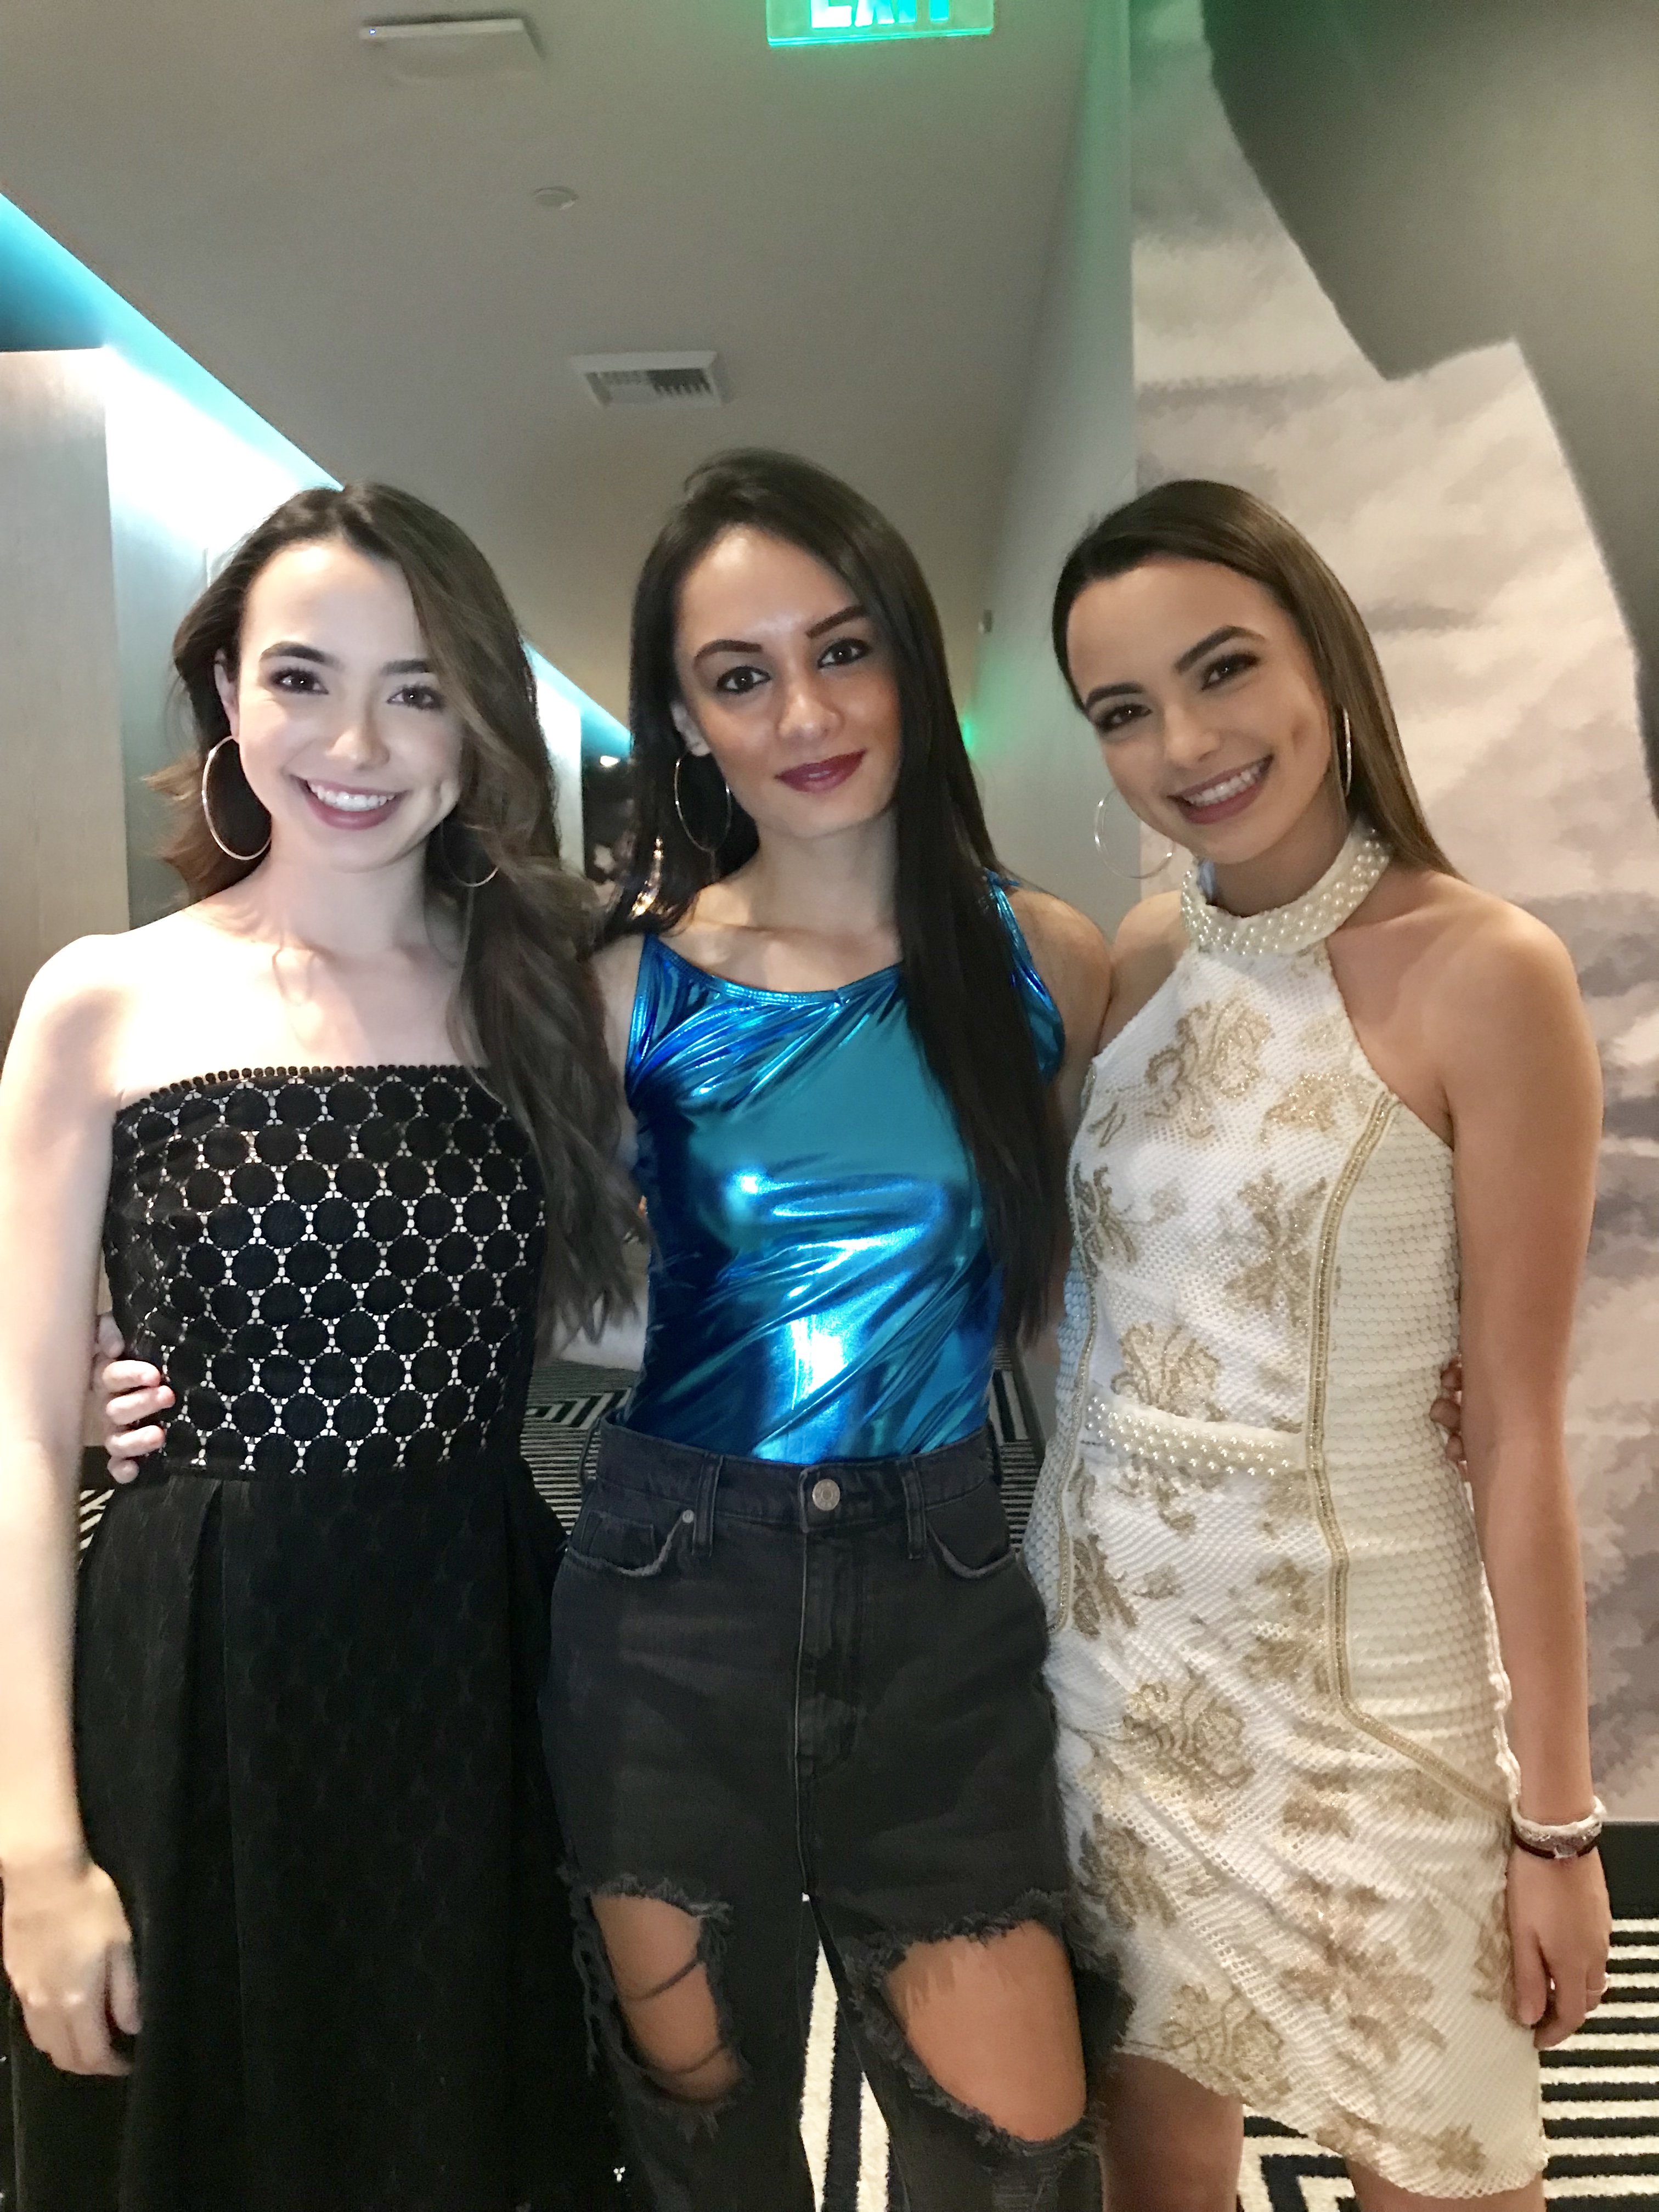 Addition mikrocomputer Skalk VIPAccessEXCLUSIVE: The Merrell Twins Interview With Alexisjoyvipaccess At  Teala Dunn's 21st Birthday Party! - ALEXISJOYVIPACCESS